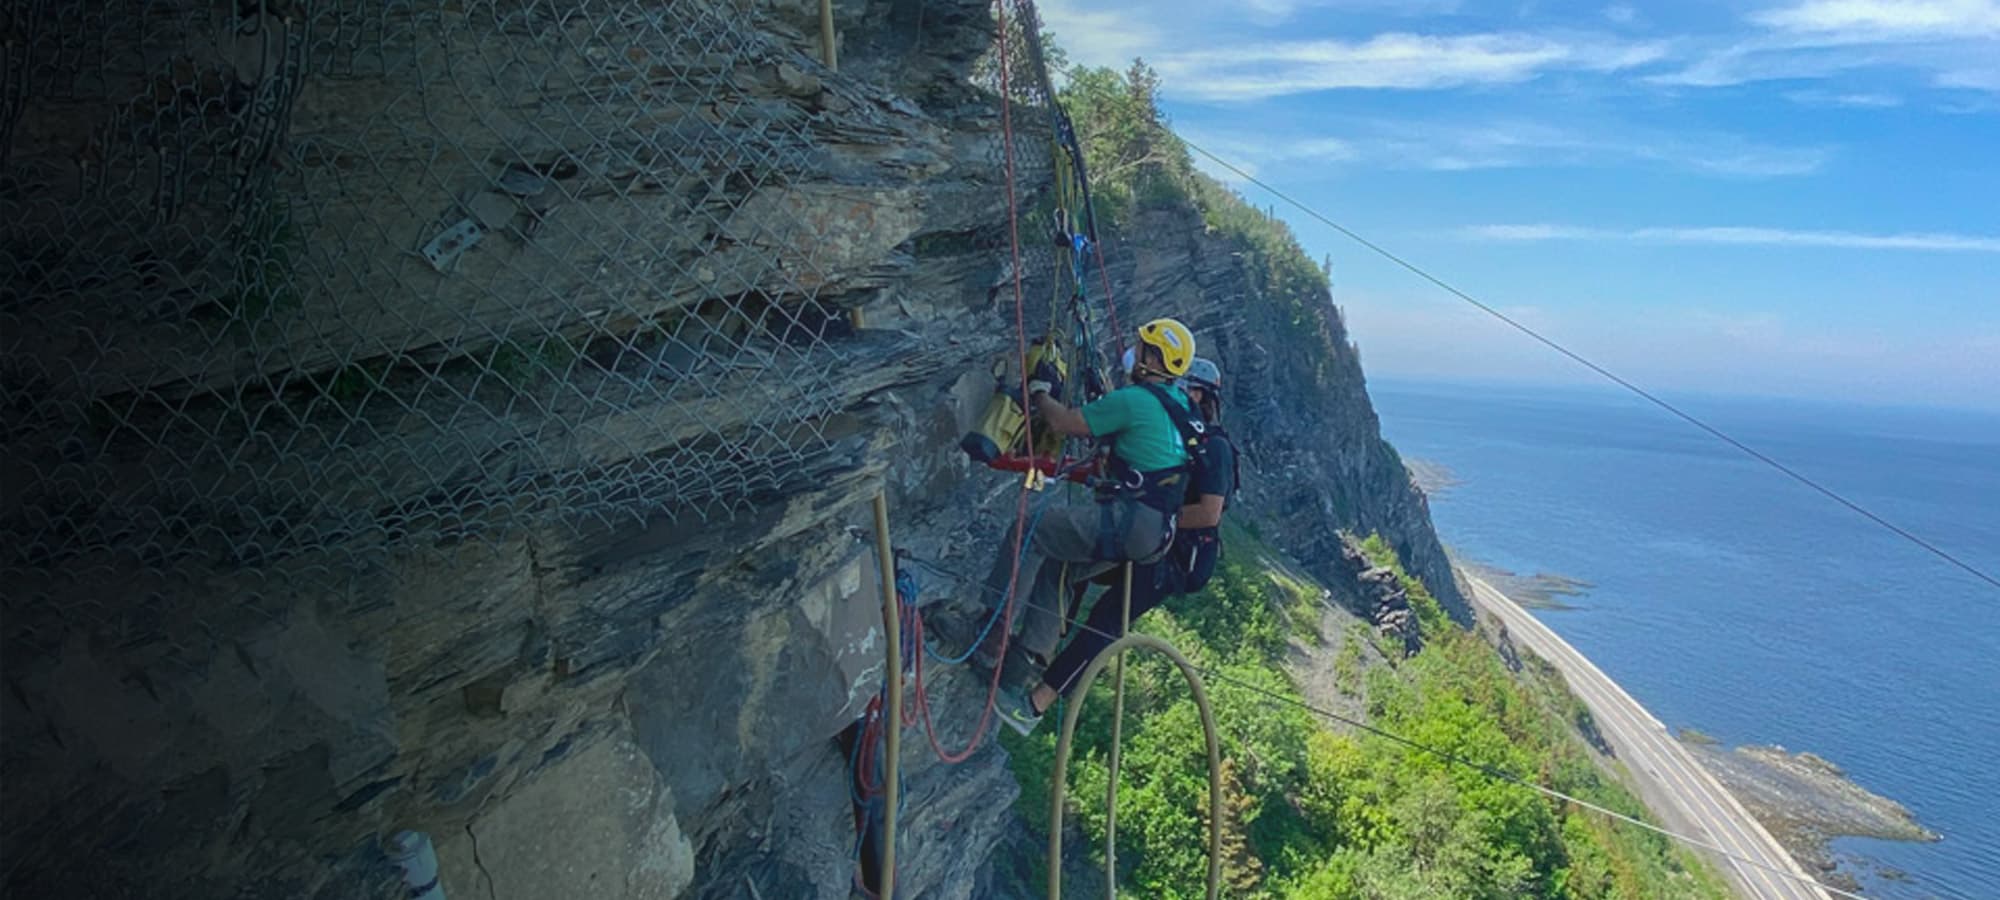 Two technicians in climbing harnesses installing equipment on the side of a rock face